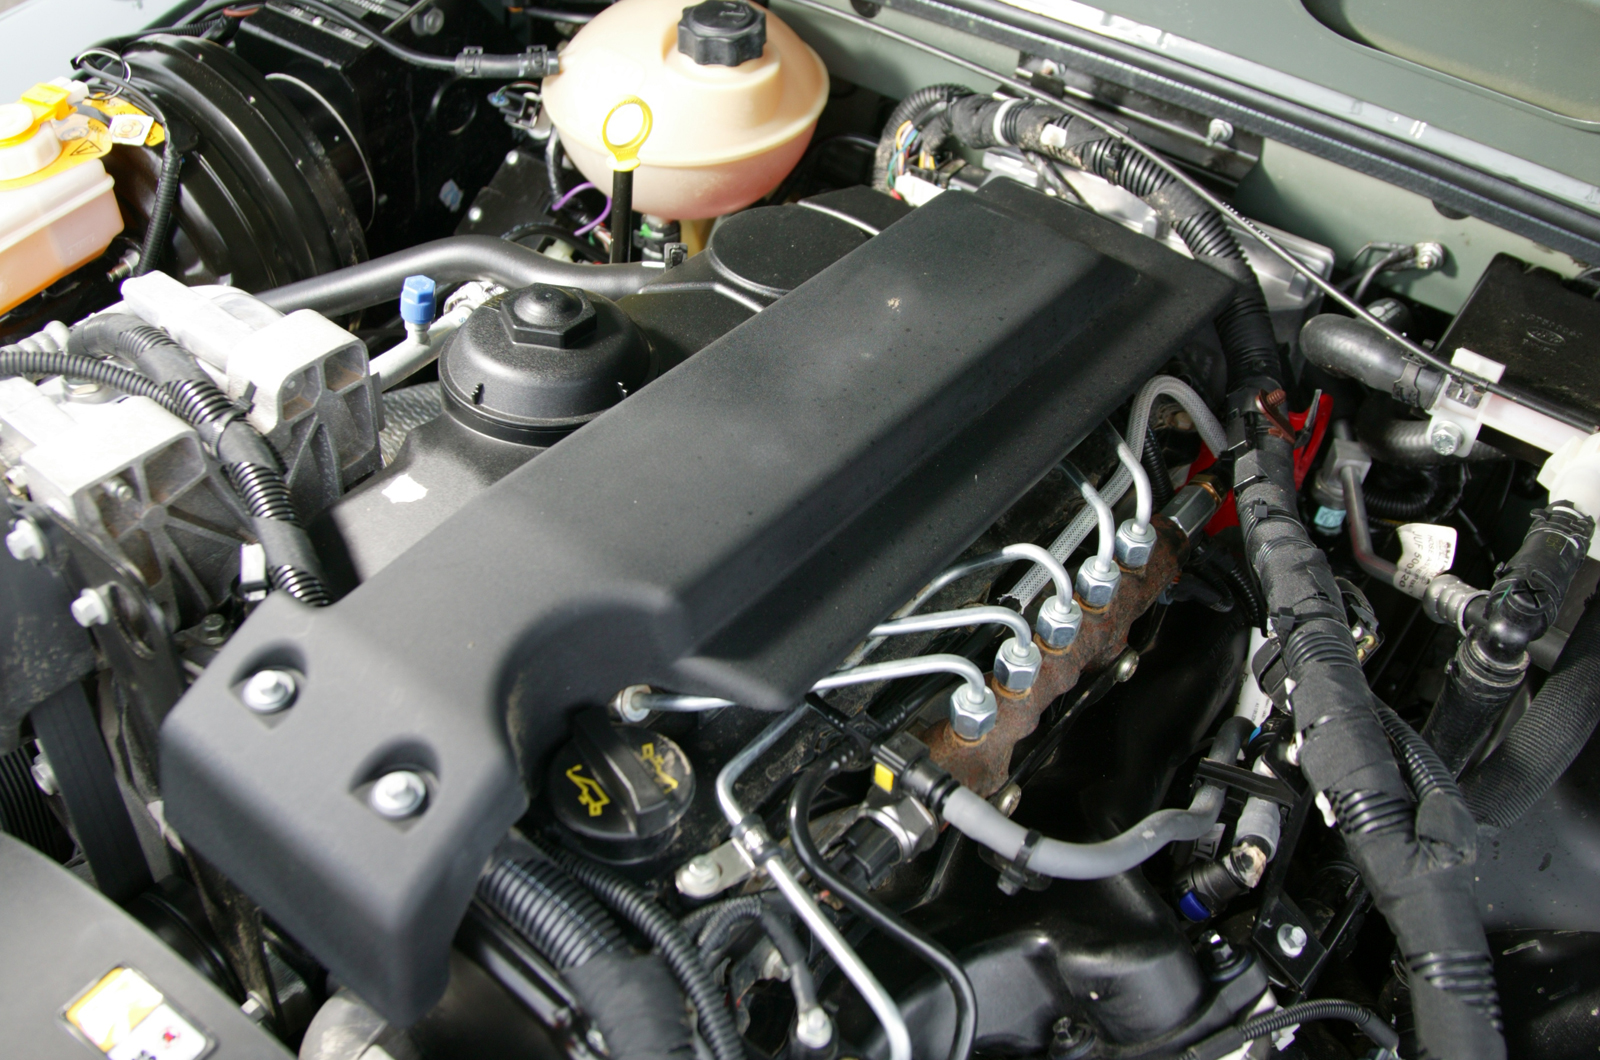 The Puma engine in the Defender